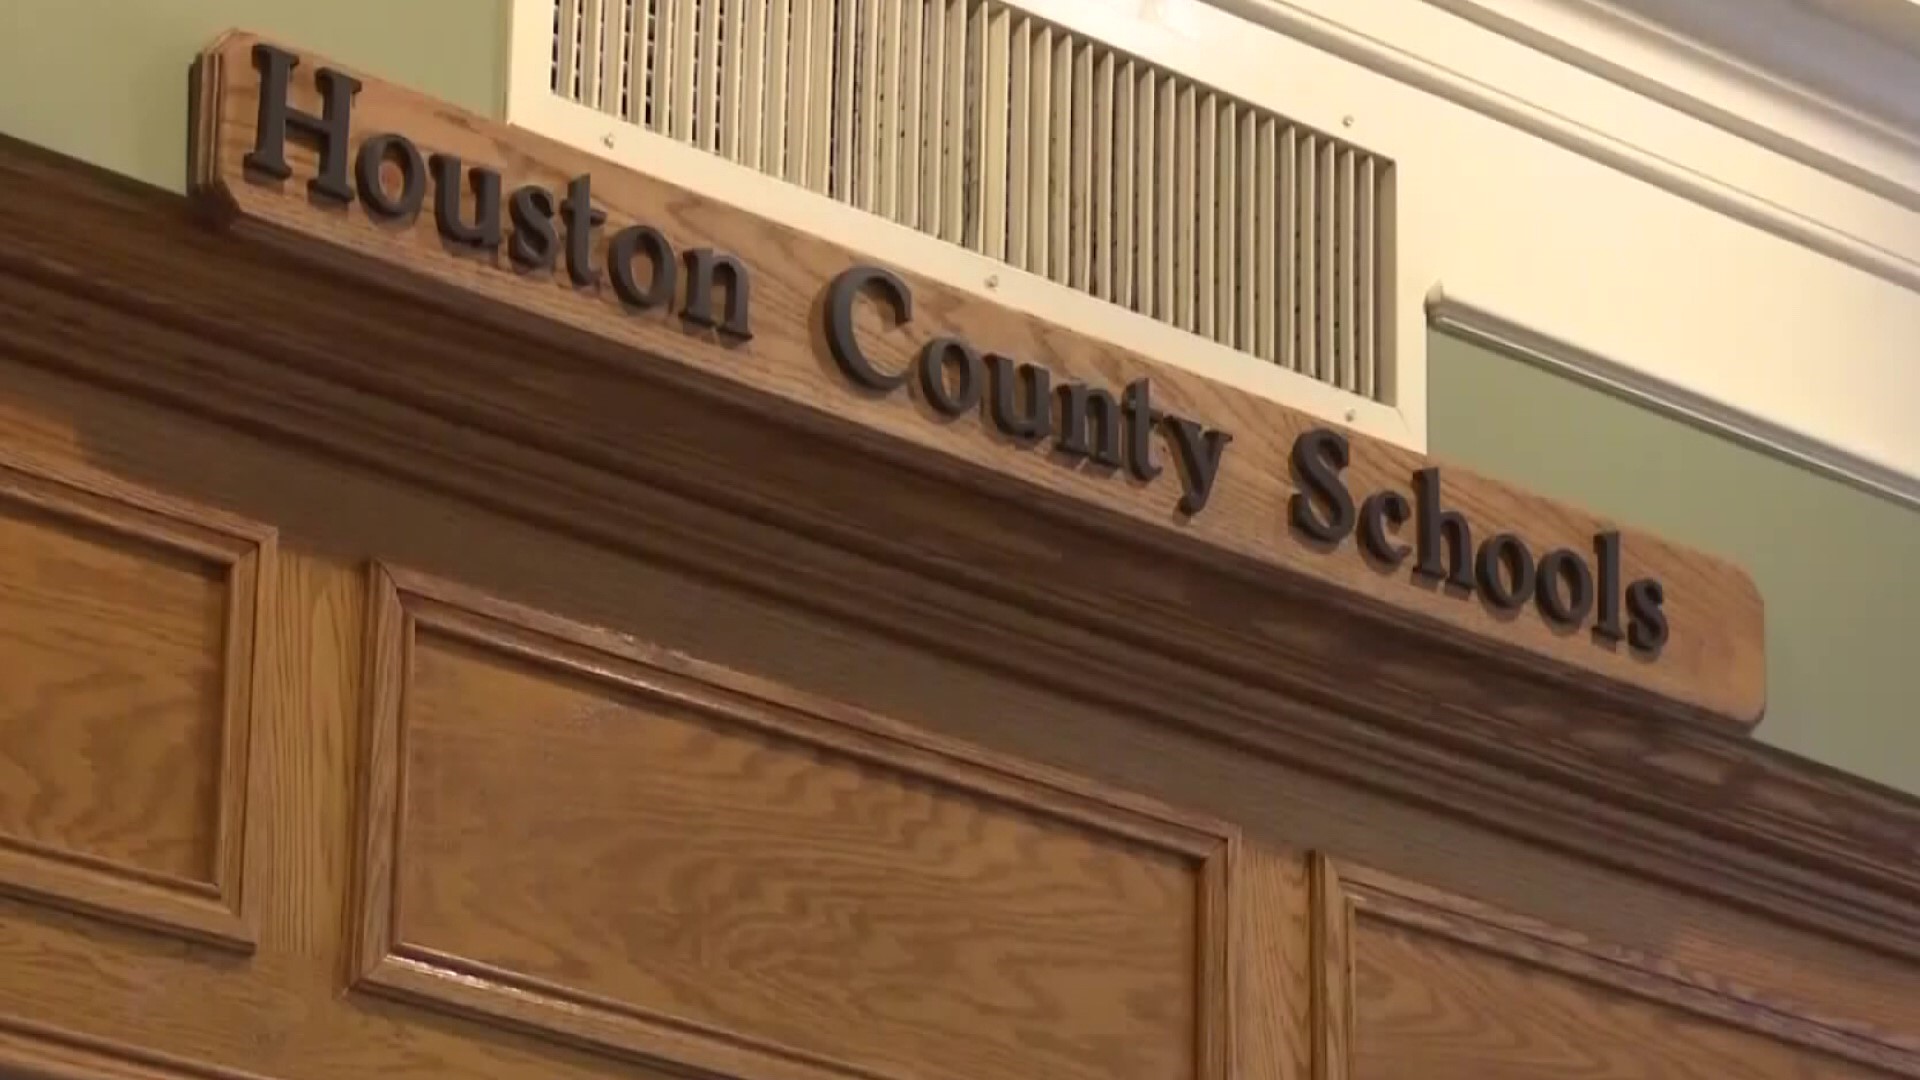 Although kids are back in the classroom, some parents are unhappy with the district's approach to COVID-19 – they say everyone needs to mask up.